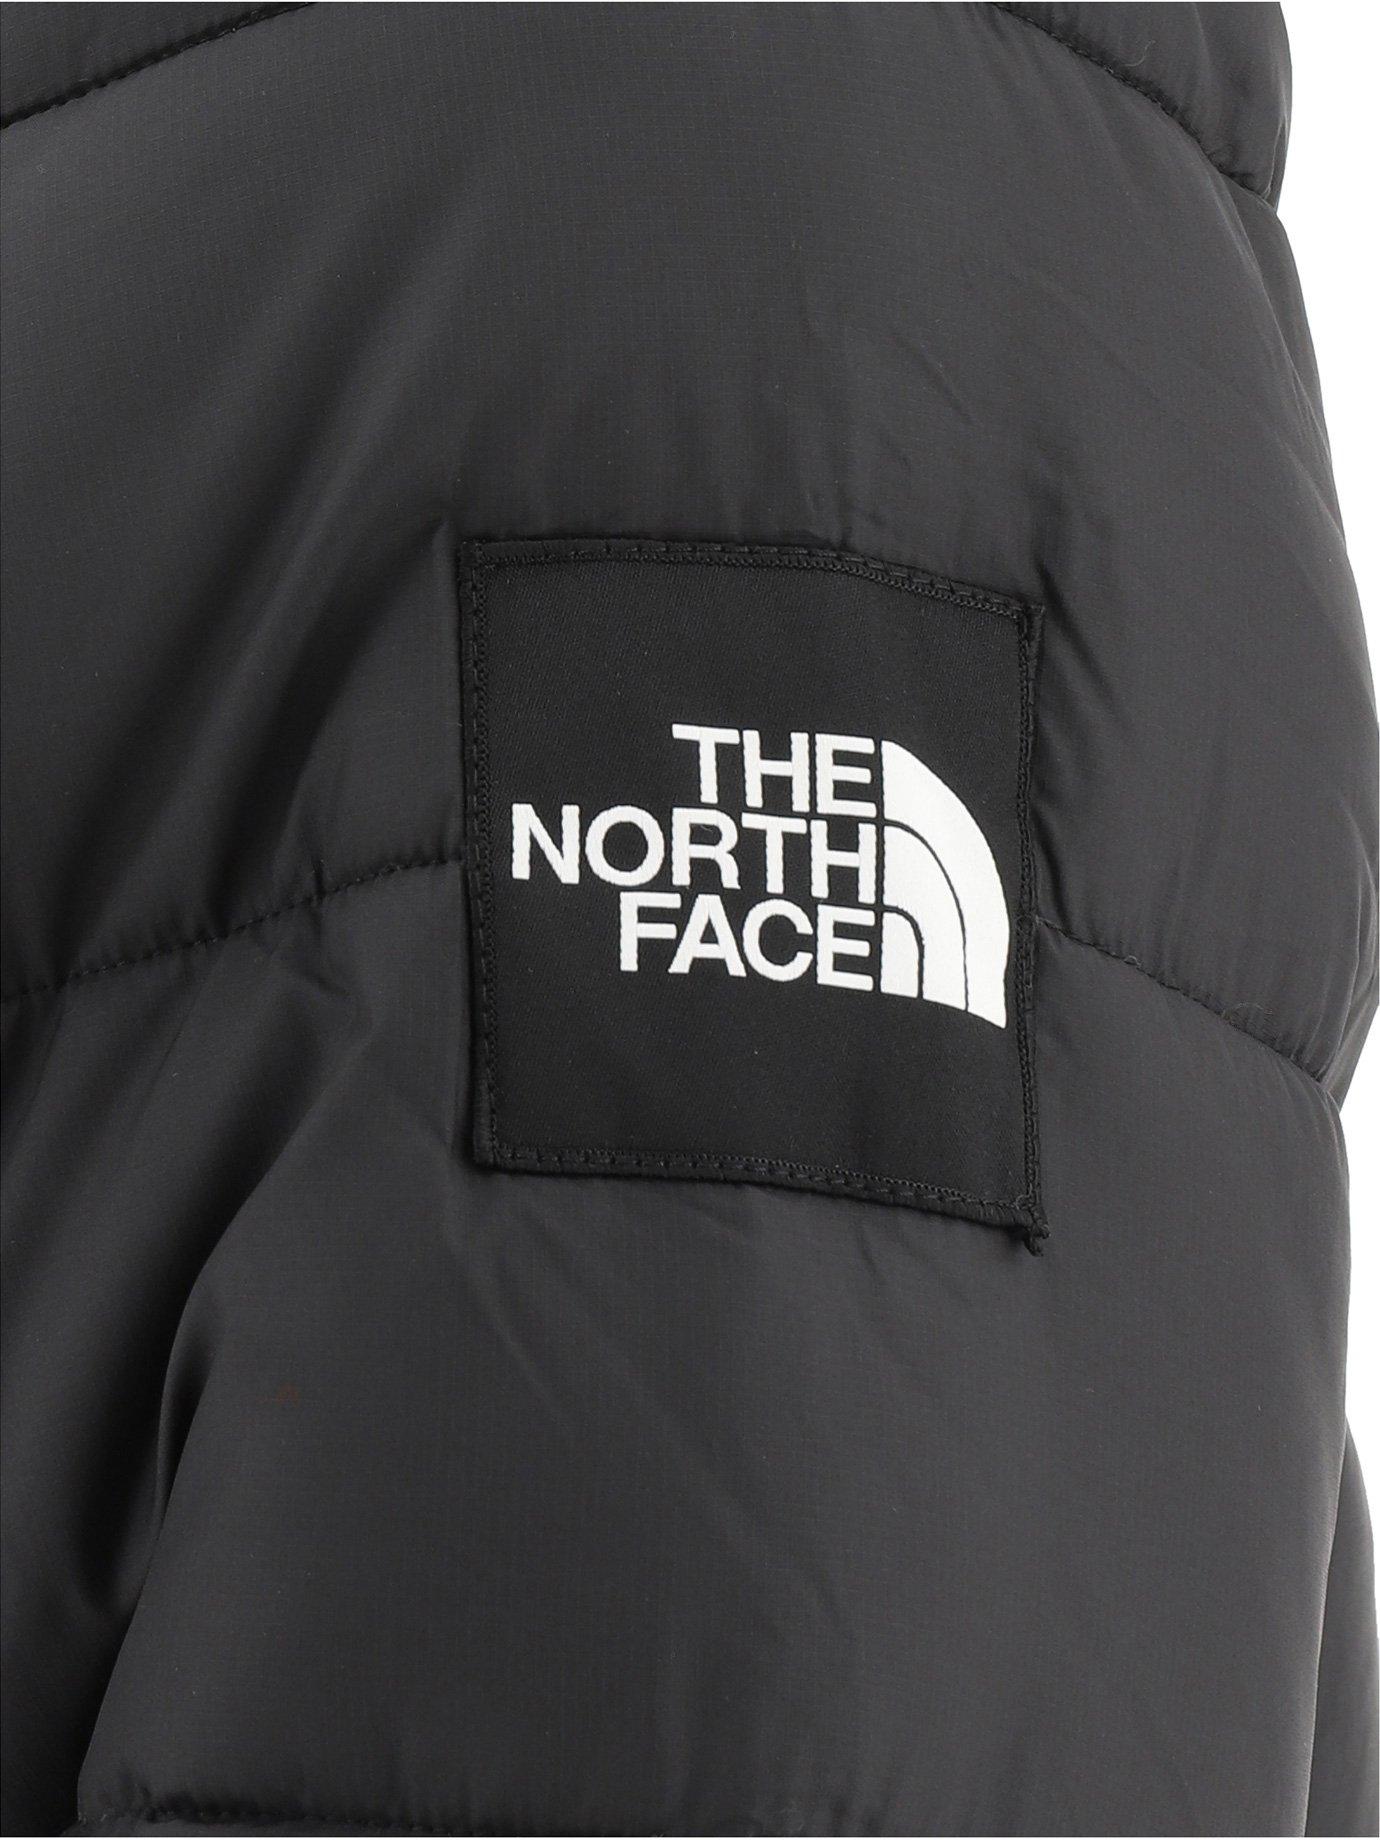 The North Face "search & Rescue Synth" Down Jacket in Black for Men - Lyst